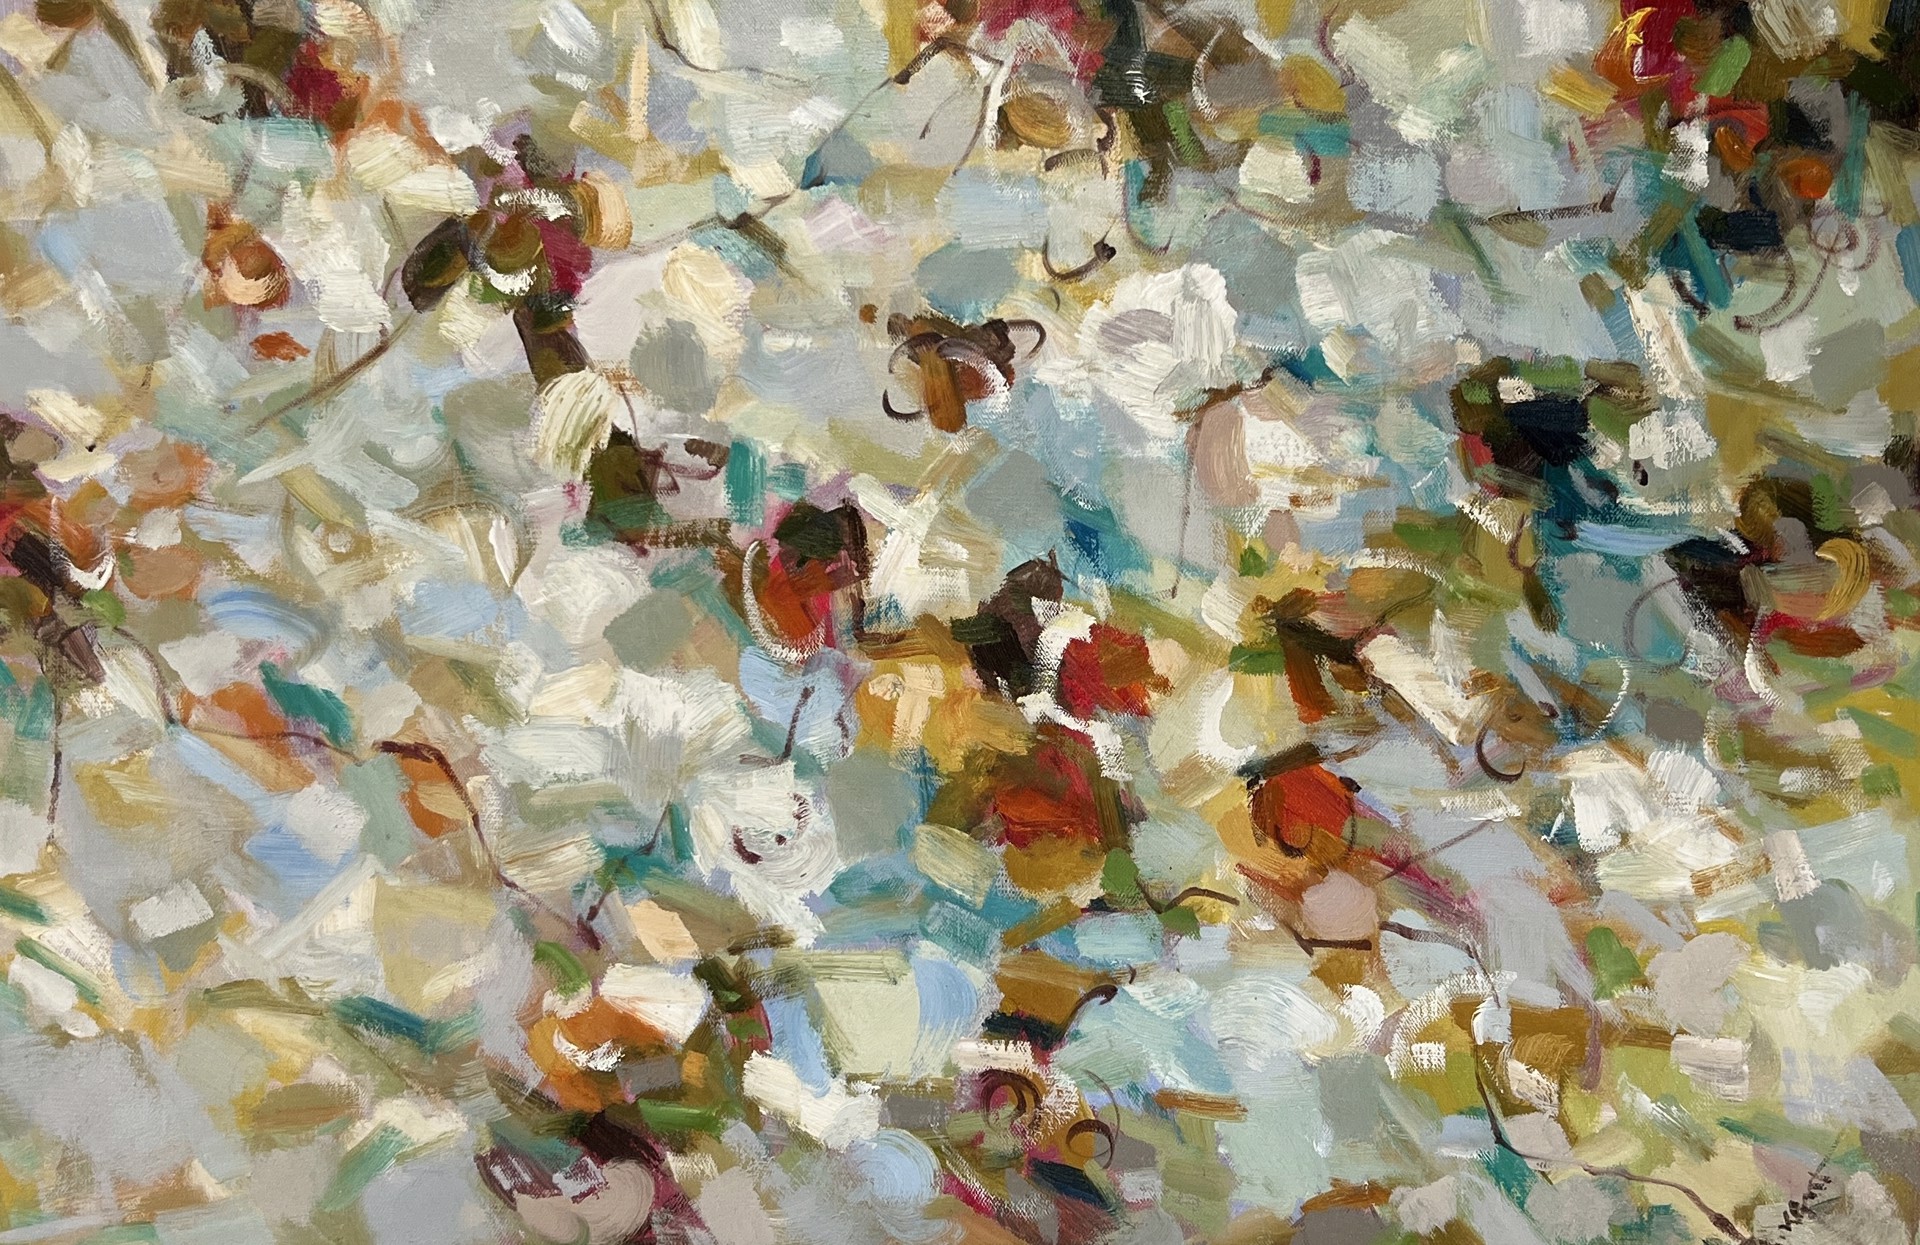 ABSTRACT FLORAL by R KENT